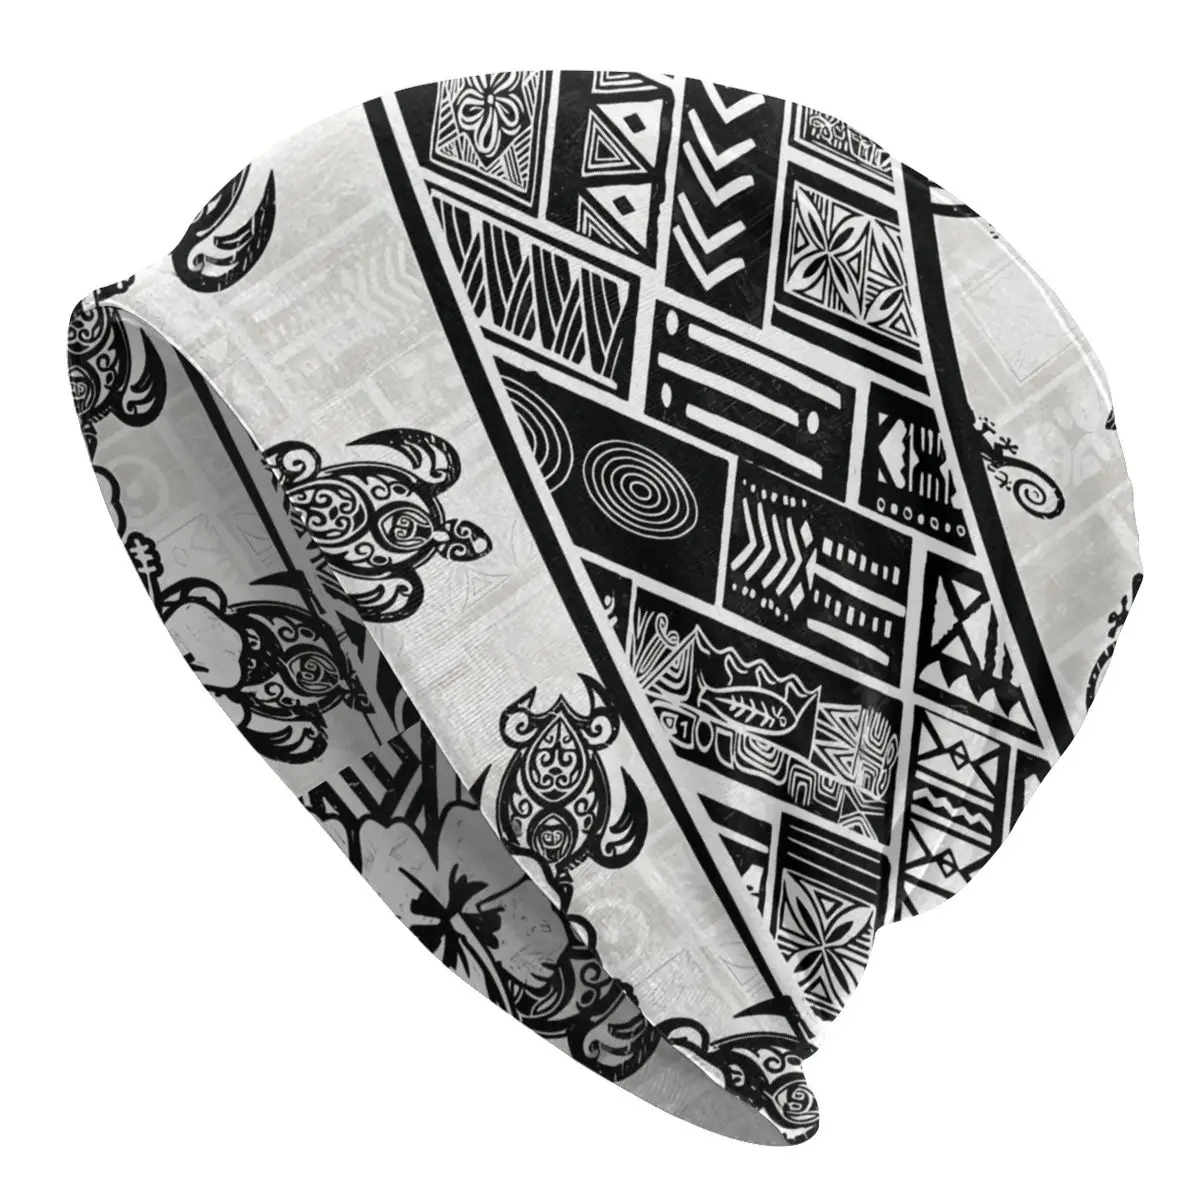 

Black And White Polynesian Tribal Distressed Bonnet Homme Sport Samoan Skullies Thin Beanies Caps Style Fabric Hats